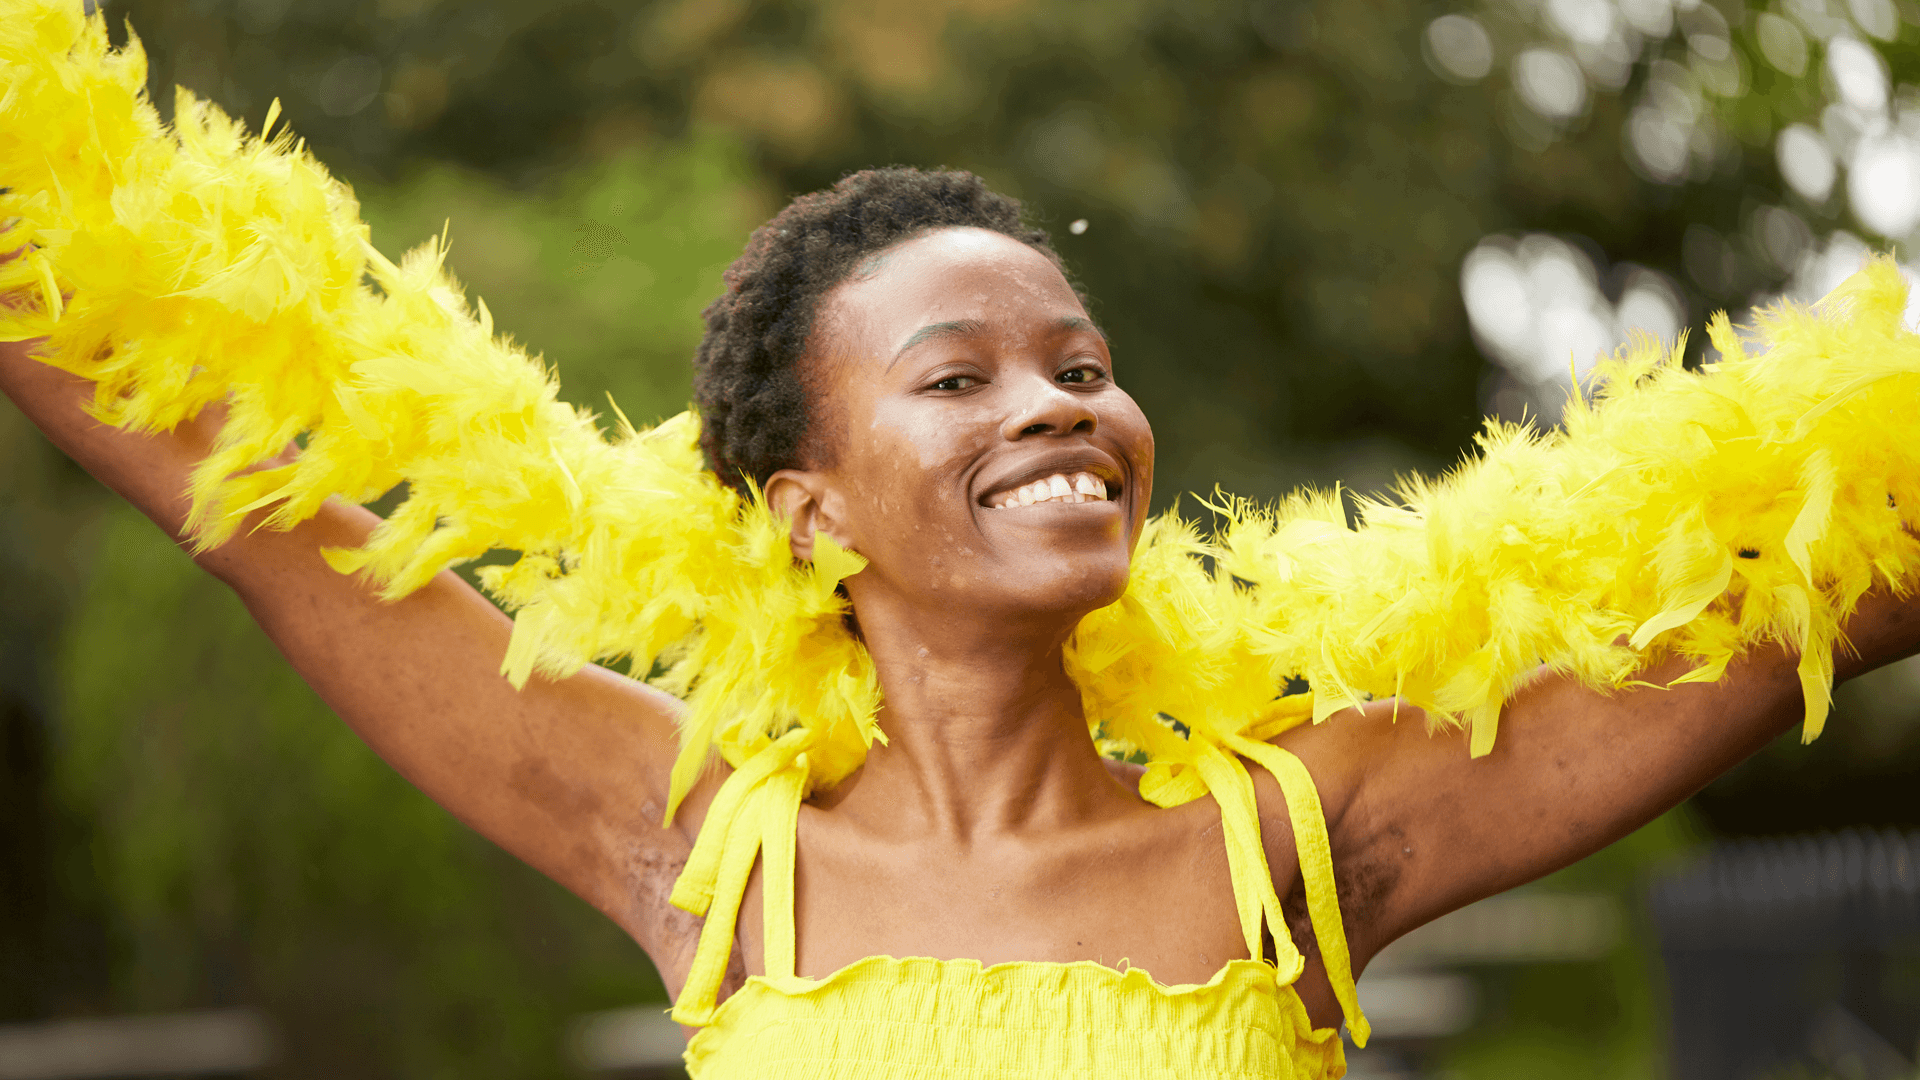 medium shot of a fundraising ambassador wearing yellow dress and yellow feather scarf smiling at the camera